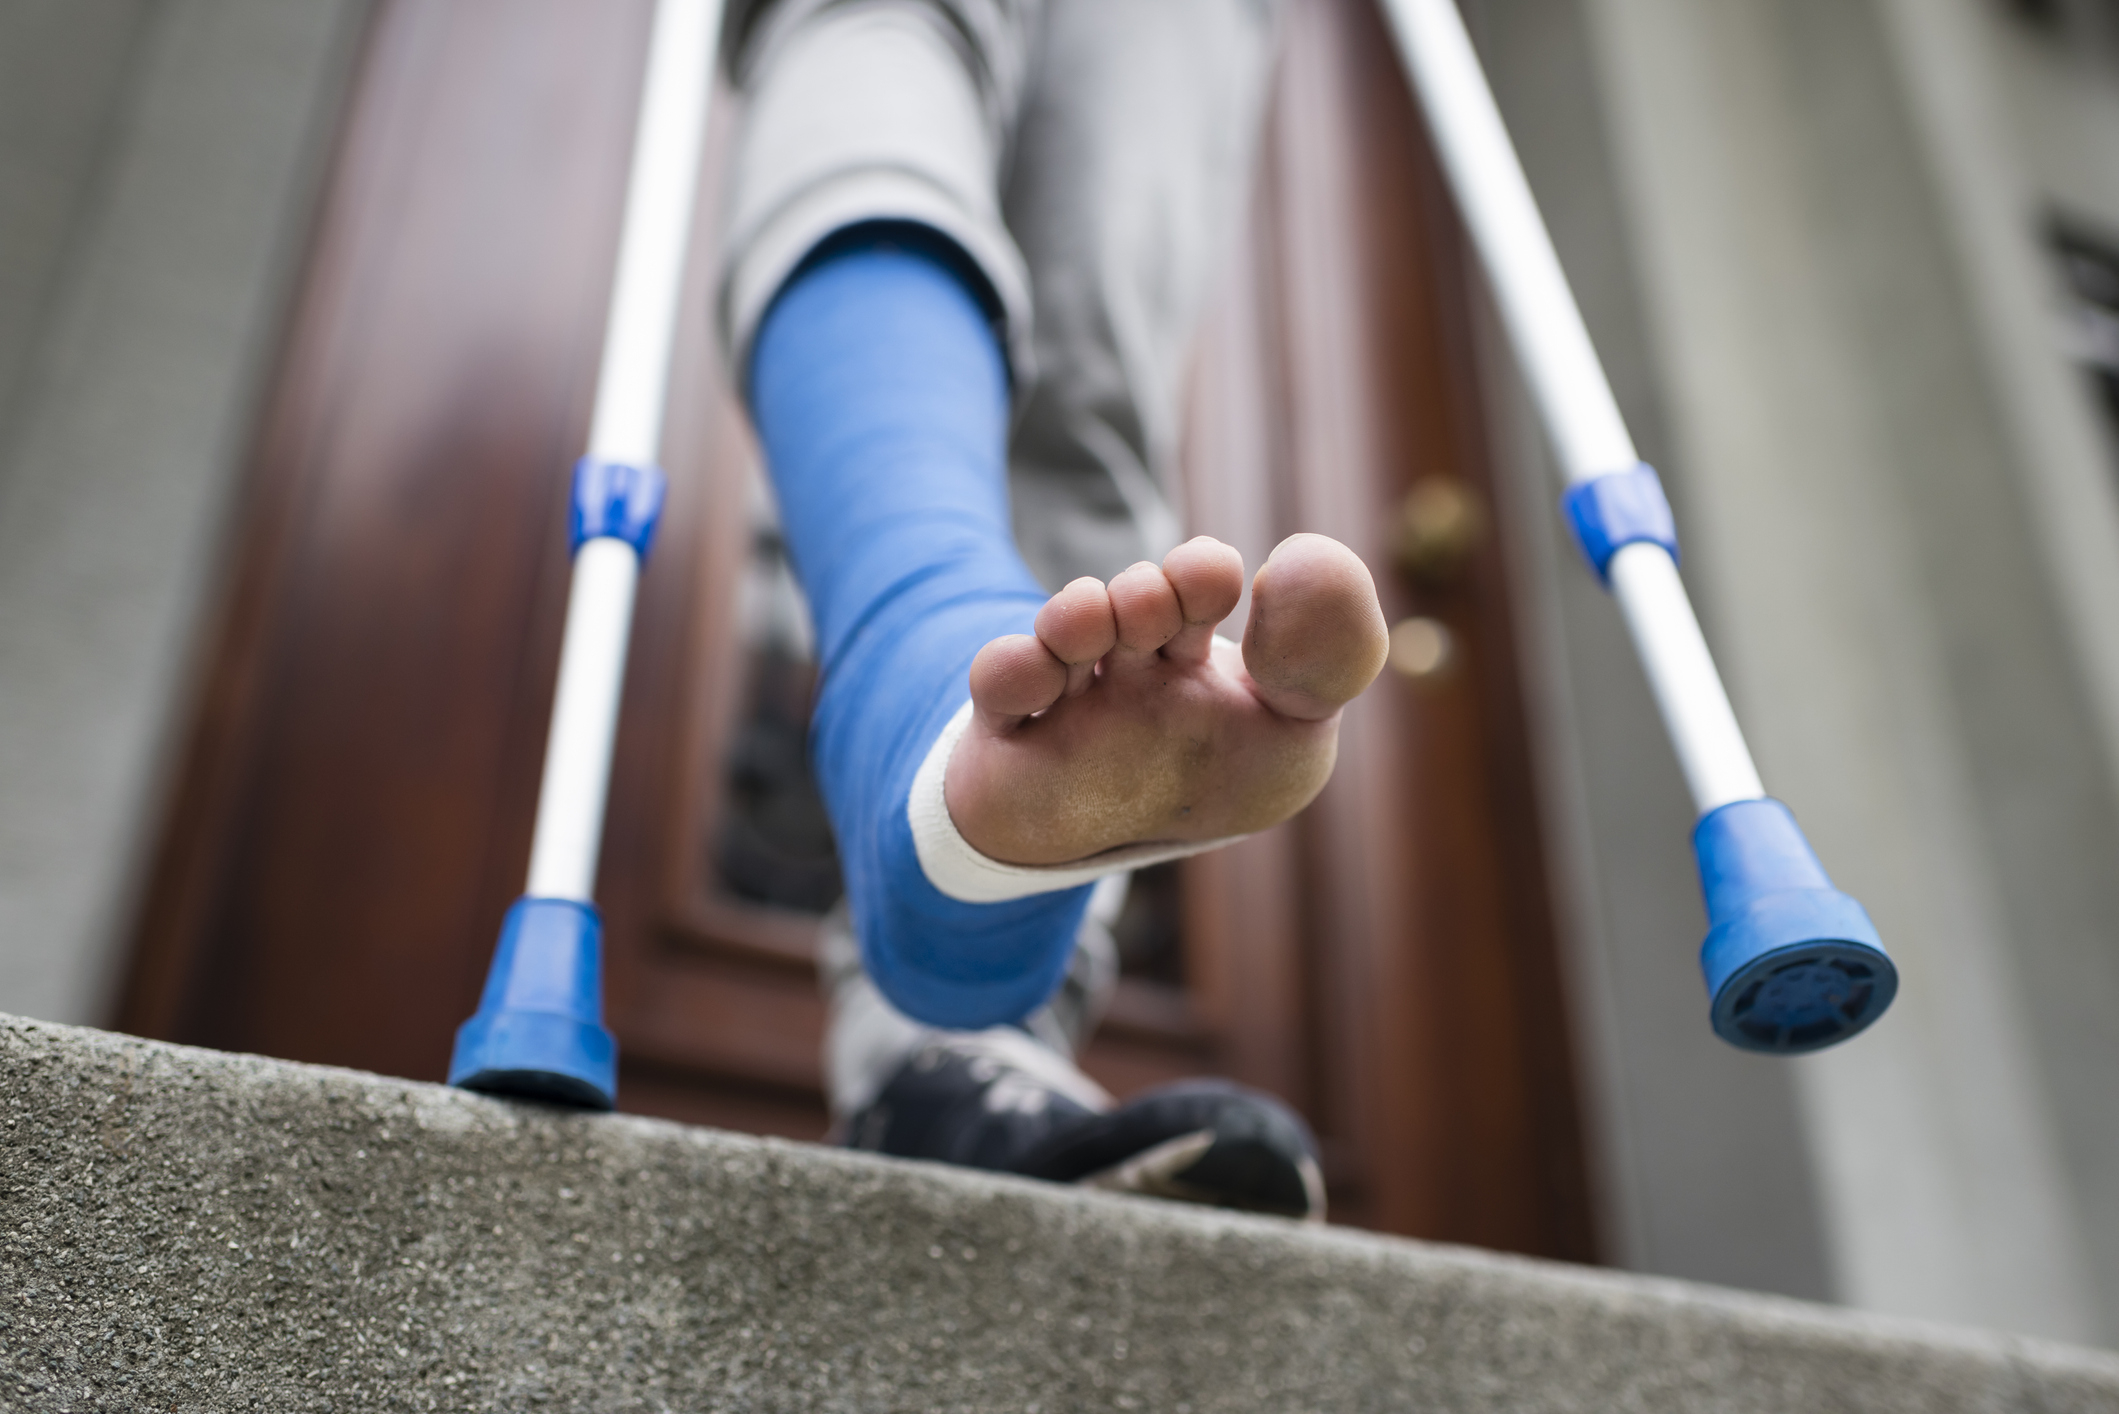 A person with a cast on their leg and using crutches